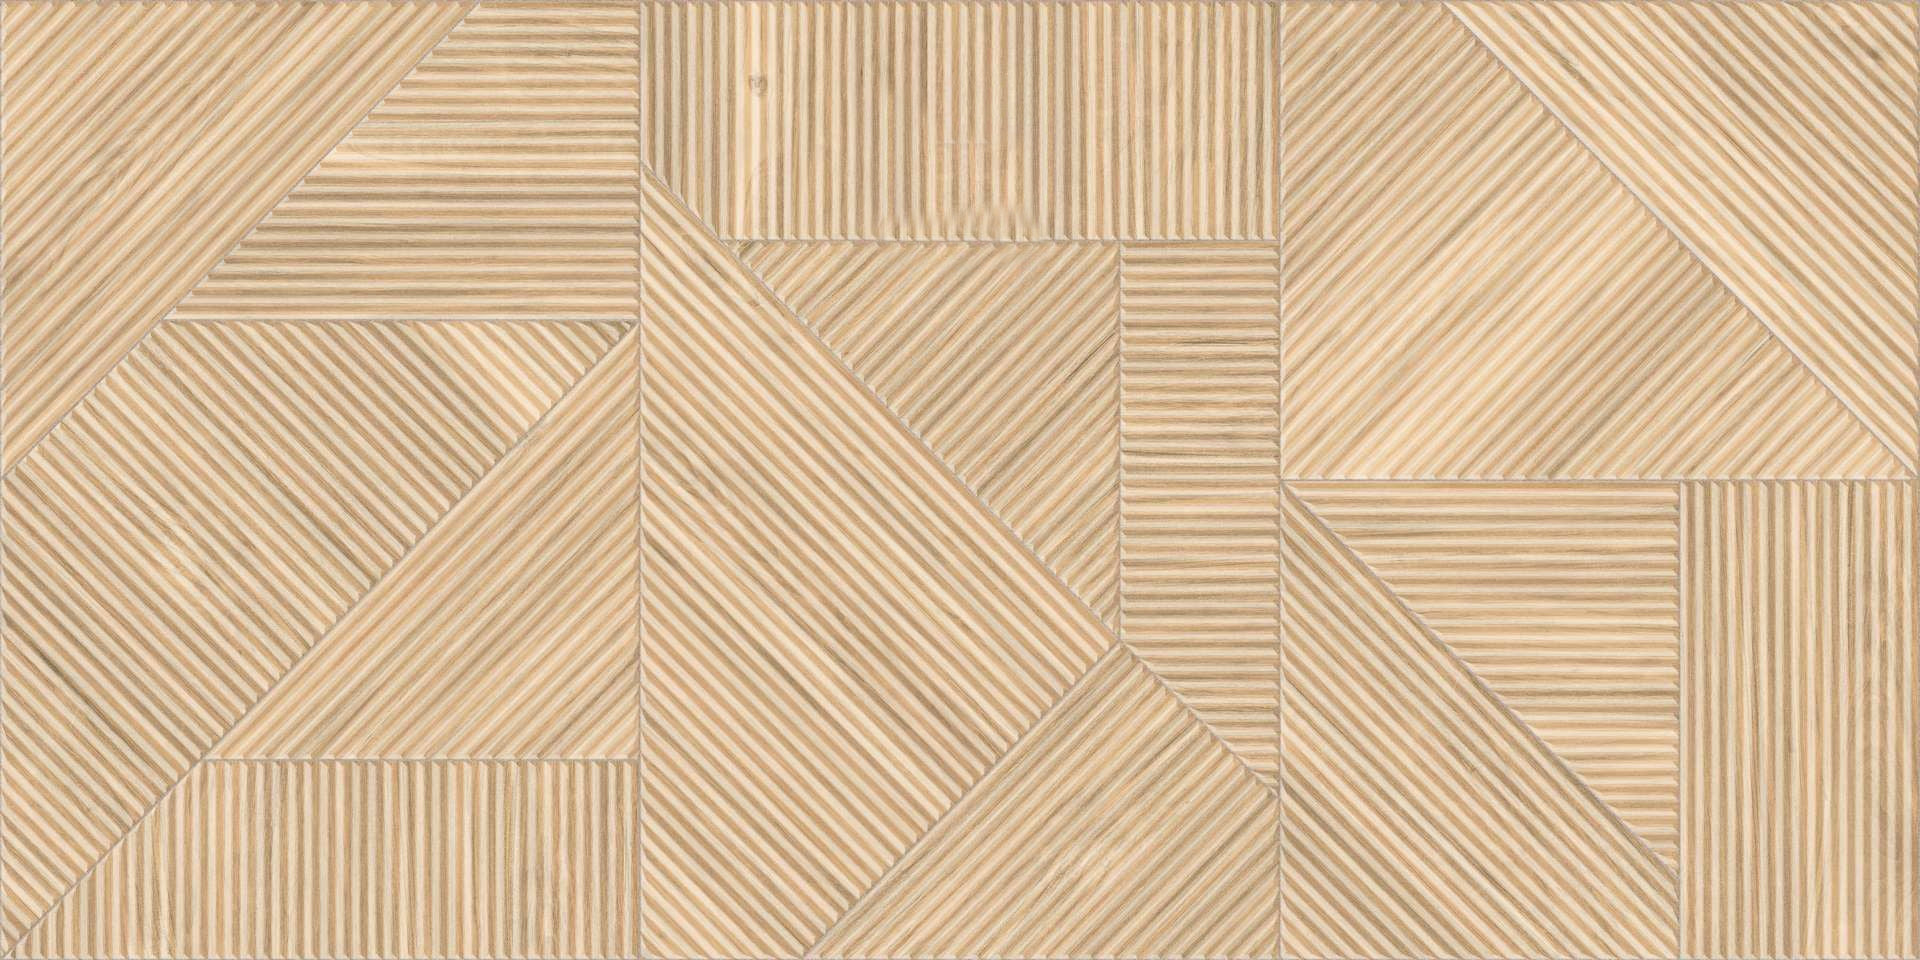 Wood-effect tiles: the beauty of natural wood without the upkeep - Stories  - Pentagon Tiles